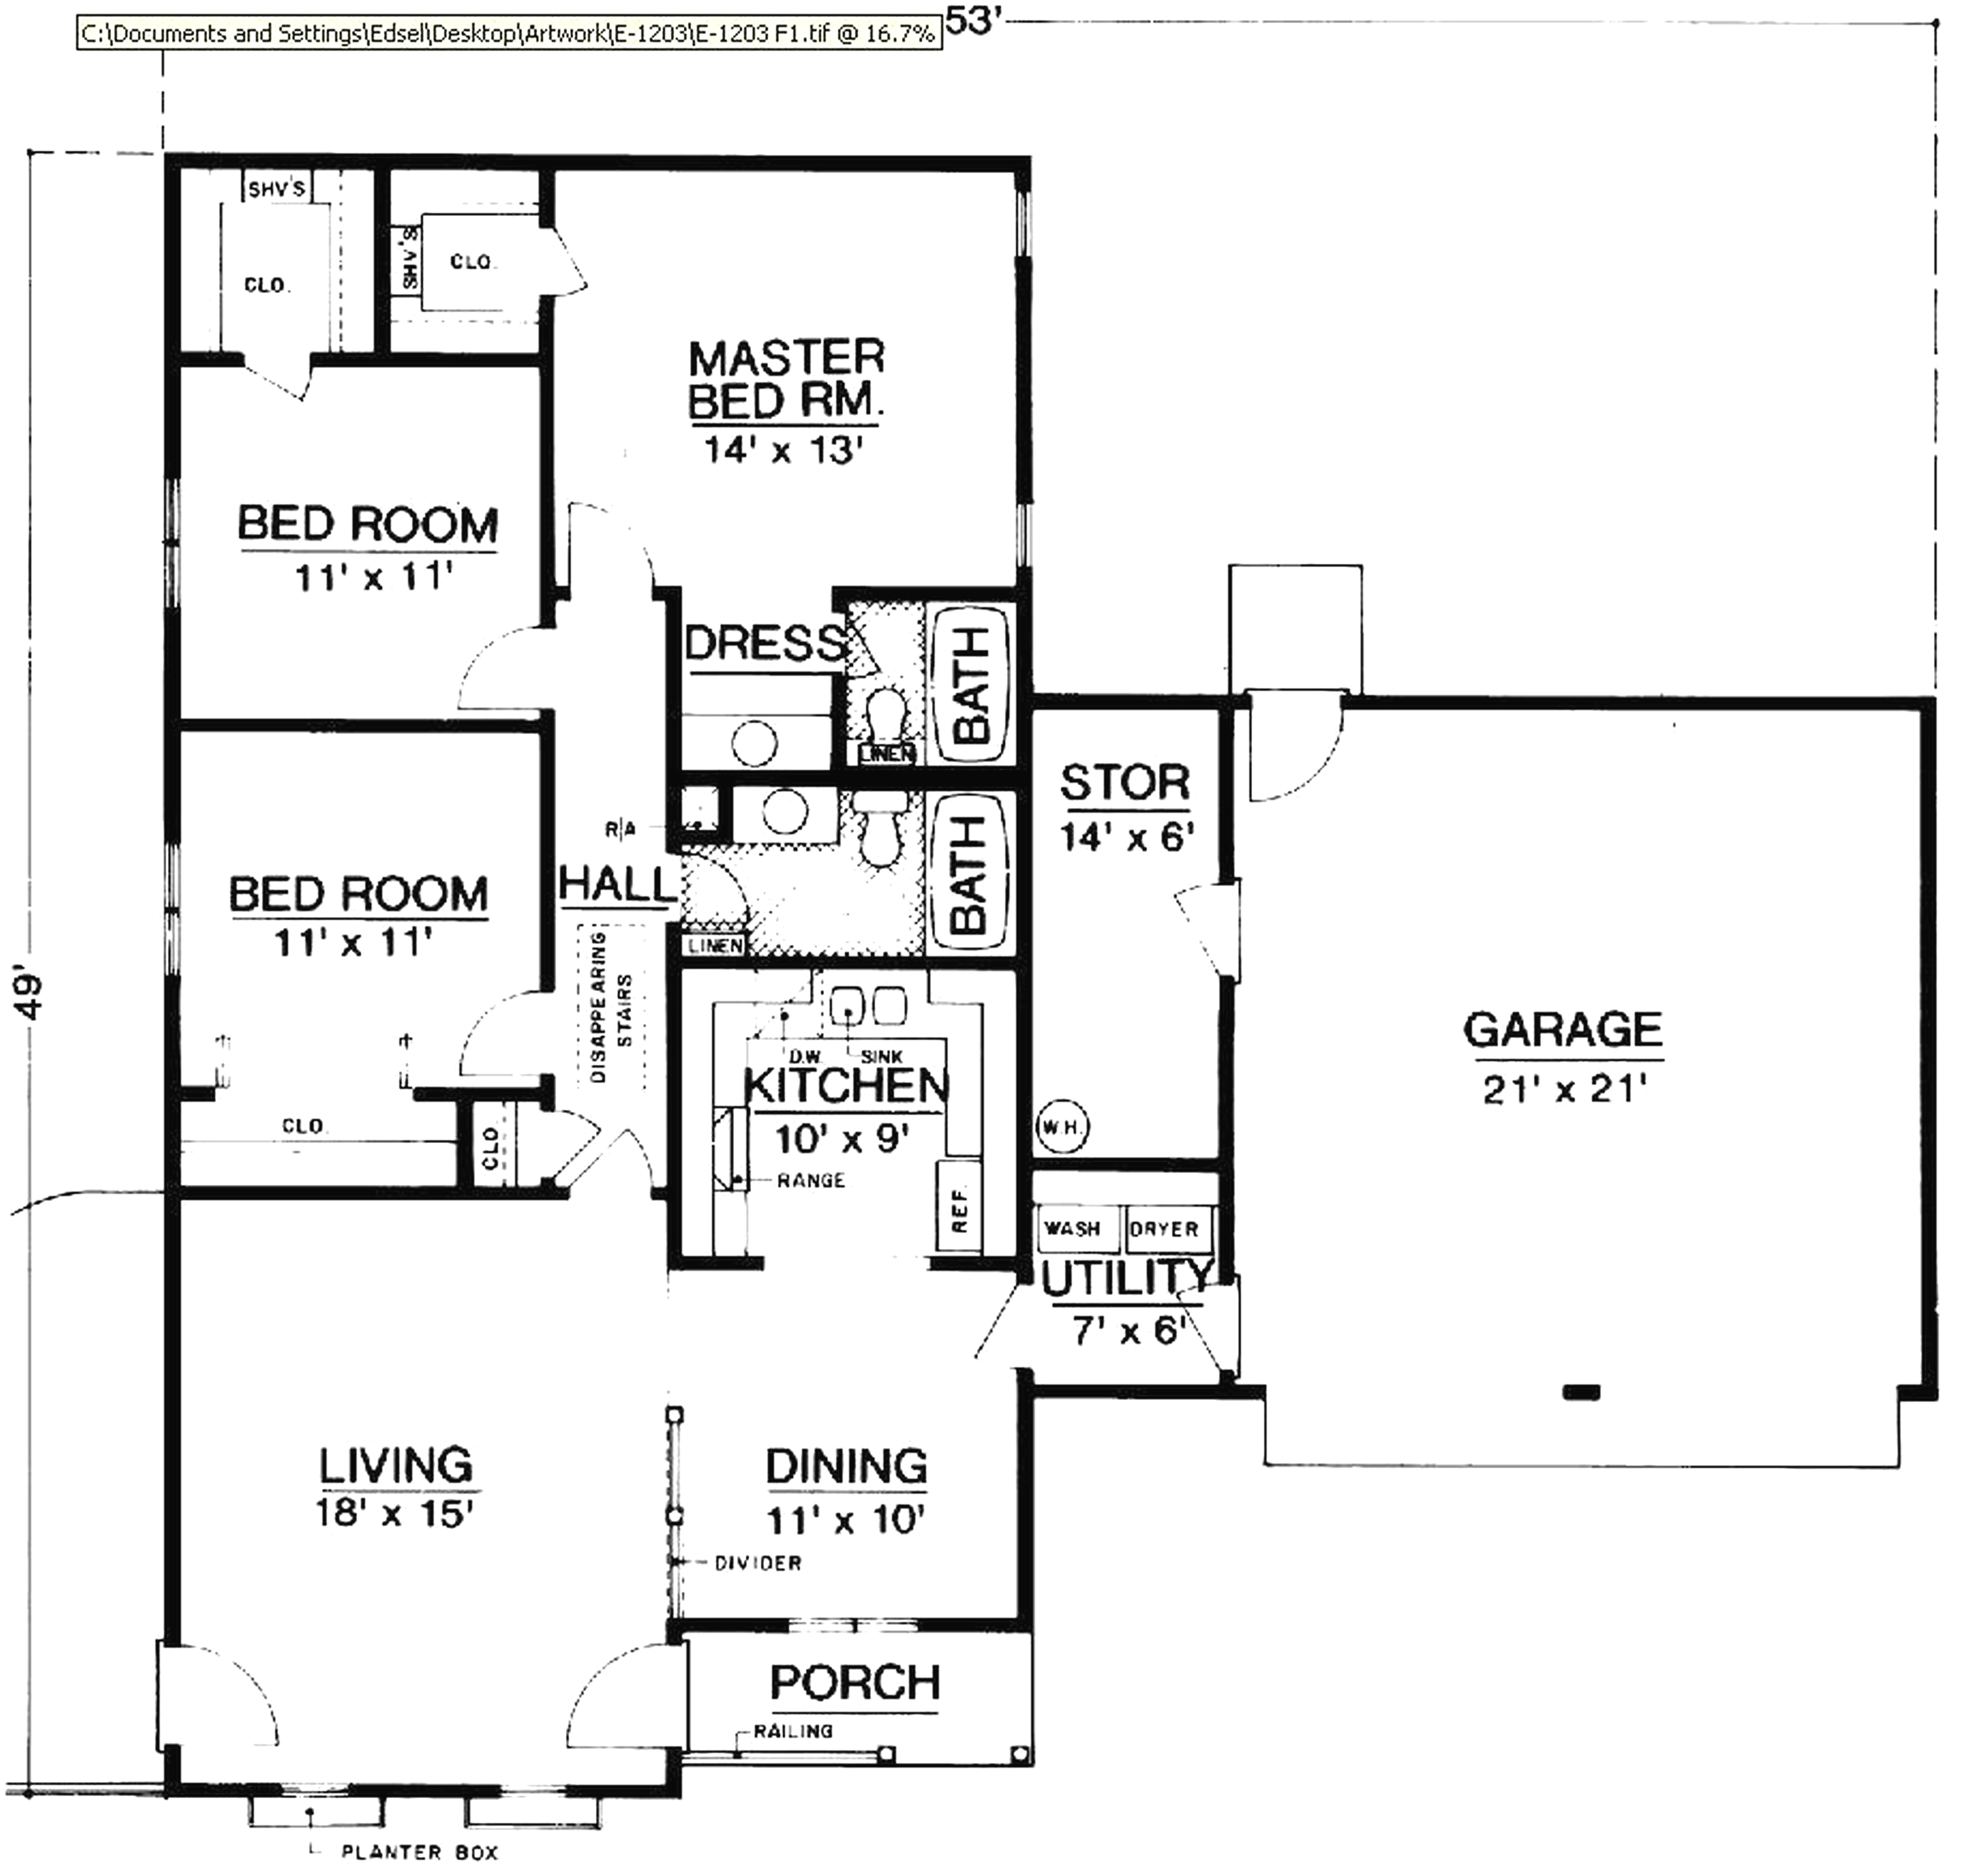 Drawing C Class Draw House Plans Online Awesome Line Floor Plan Awesome Line Floor